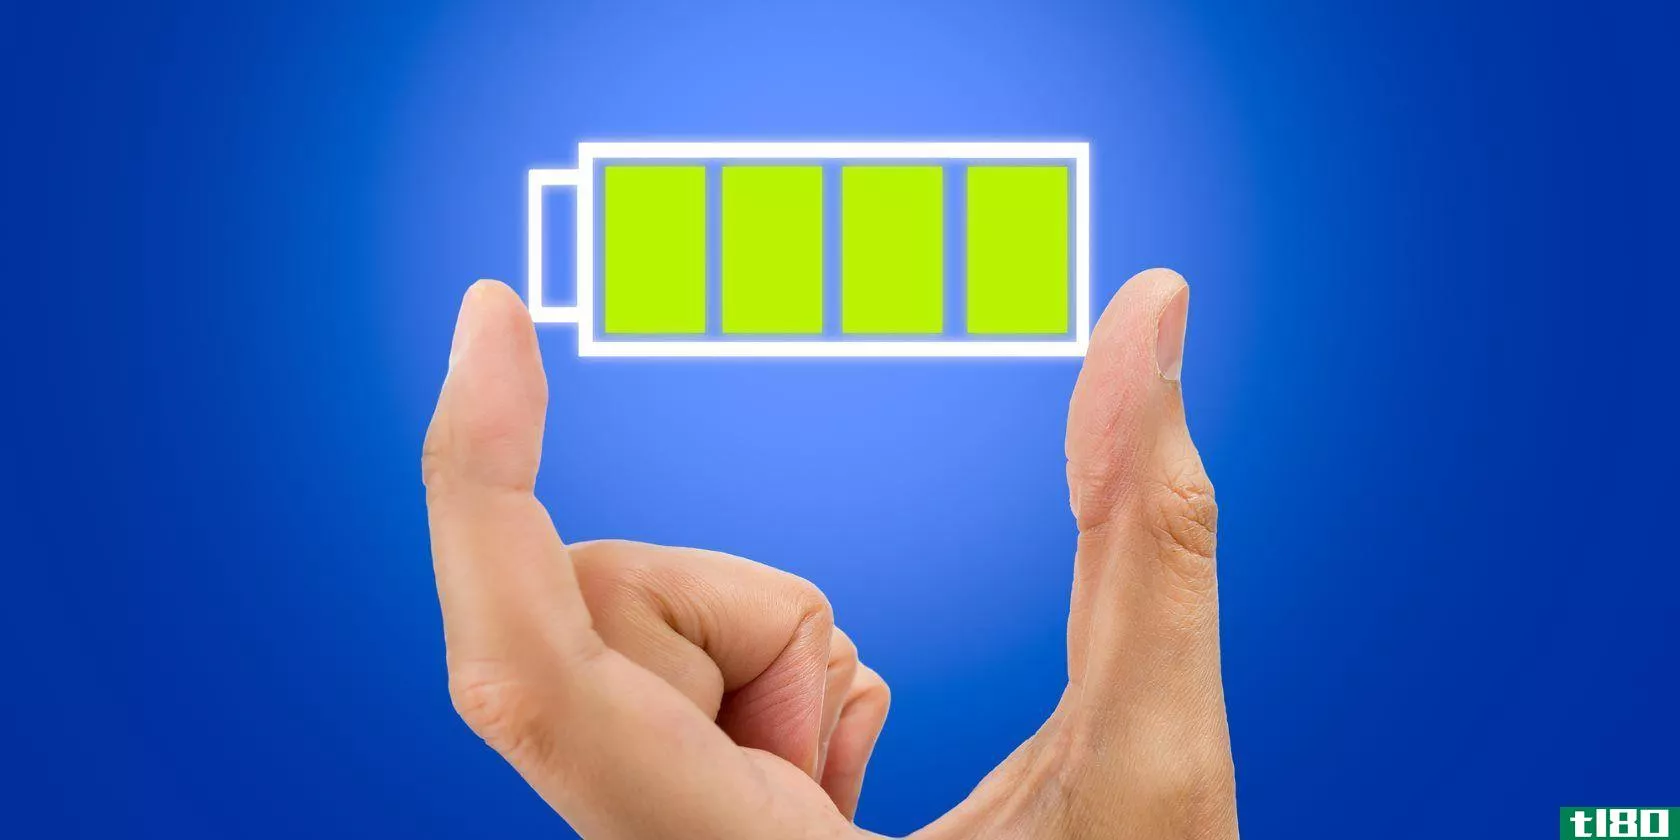 hand-showing-a-battery-full-icon